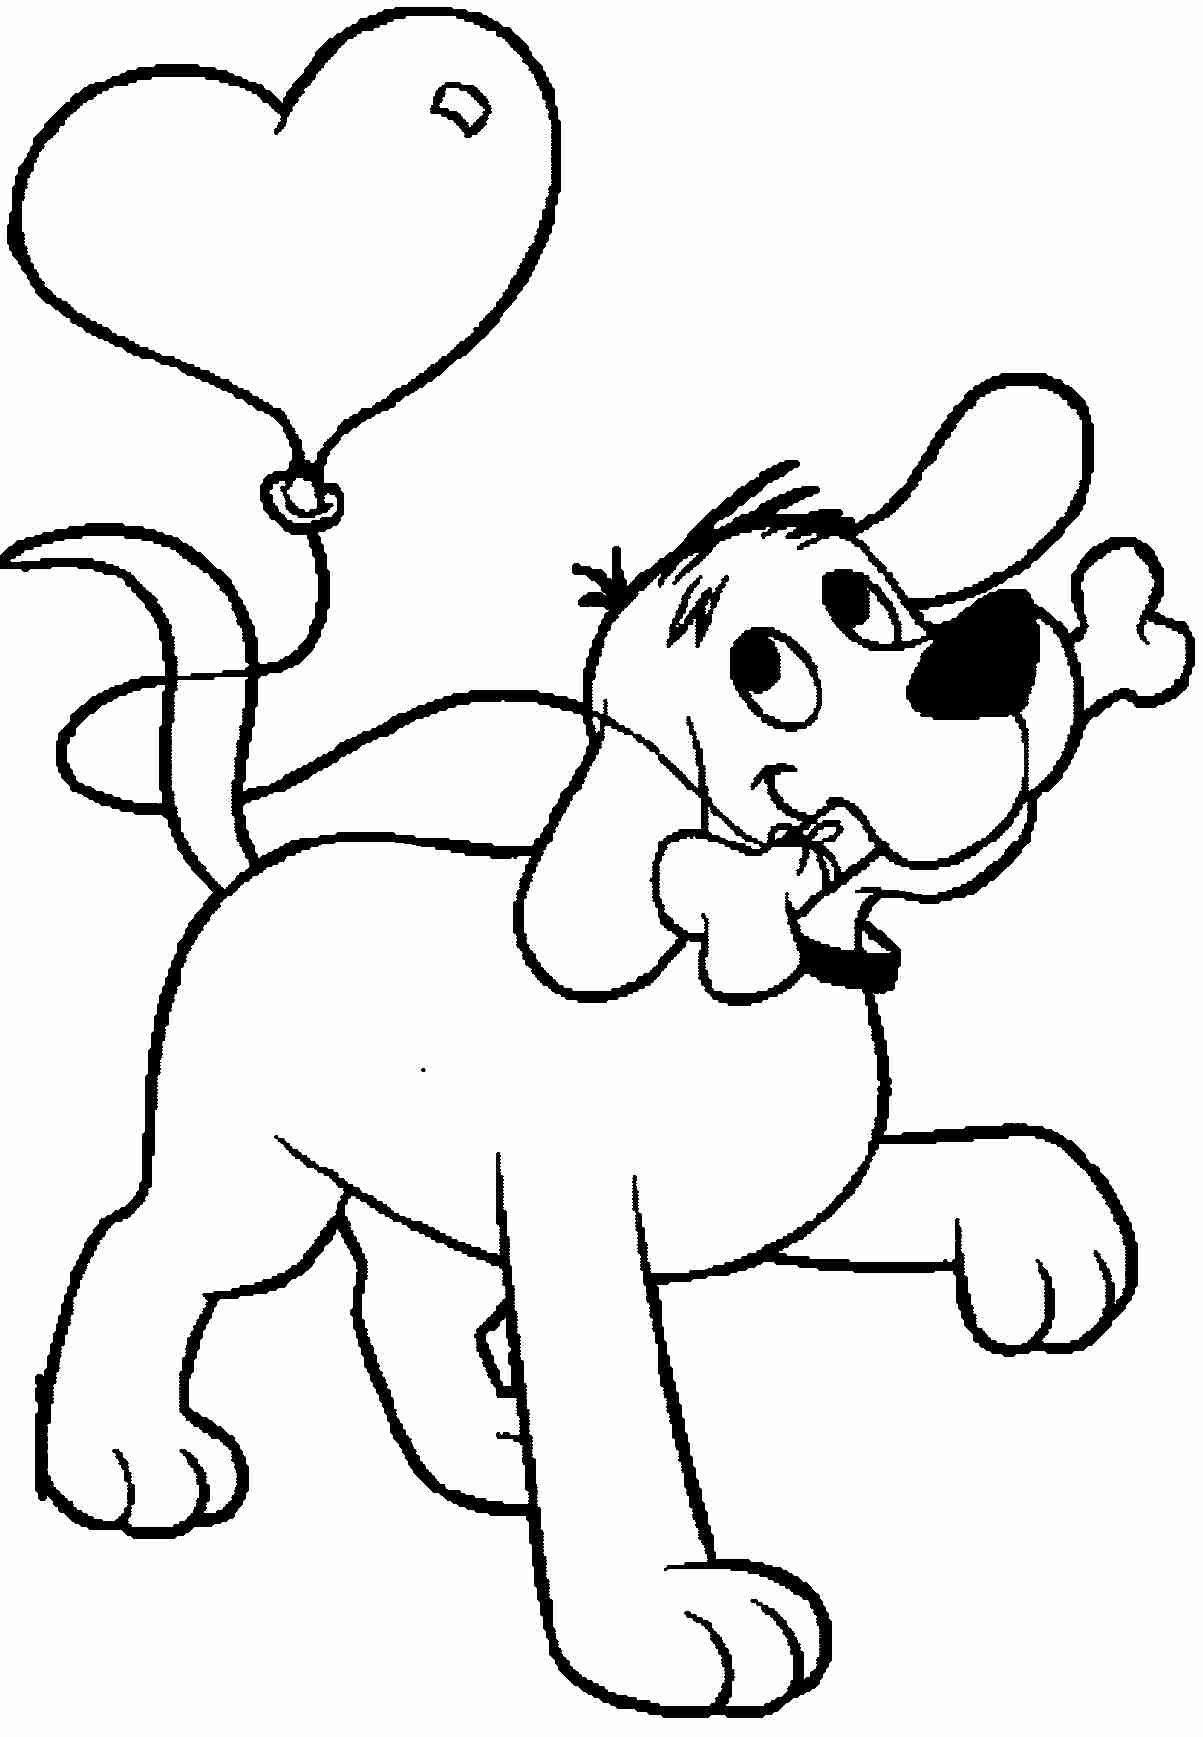 Clifford The Big Red Dog Coloring Pages at GetColorings com Free